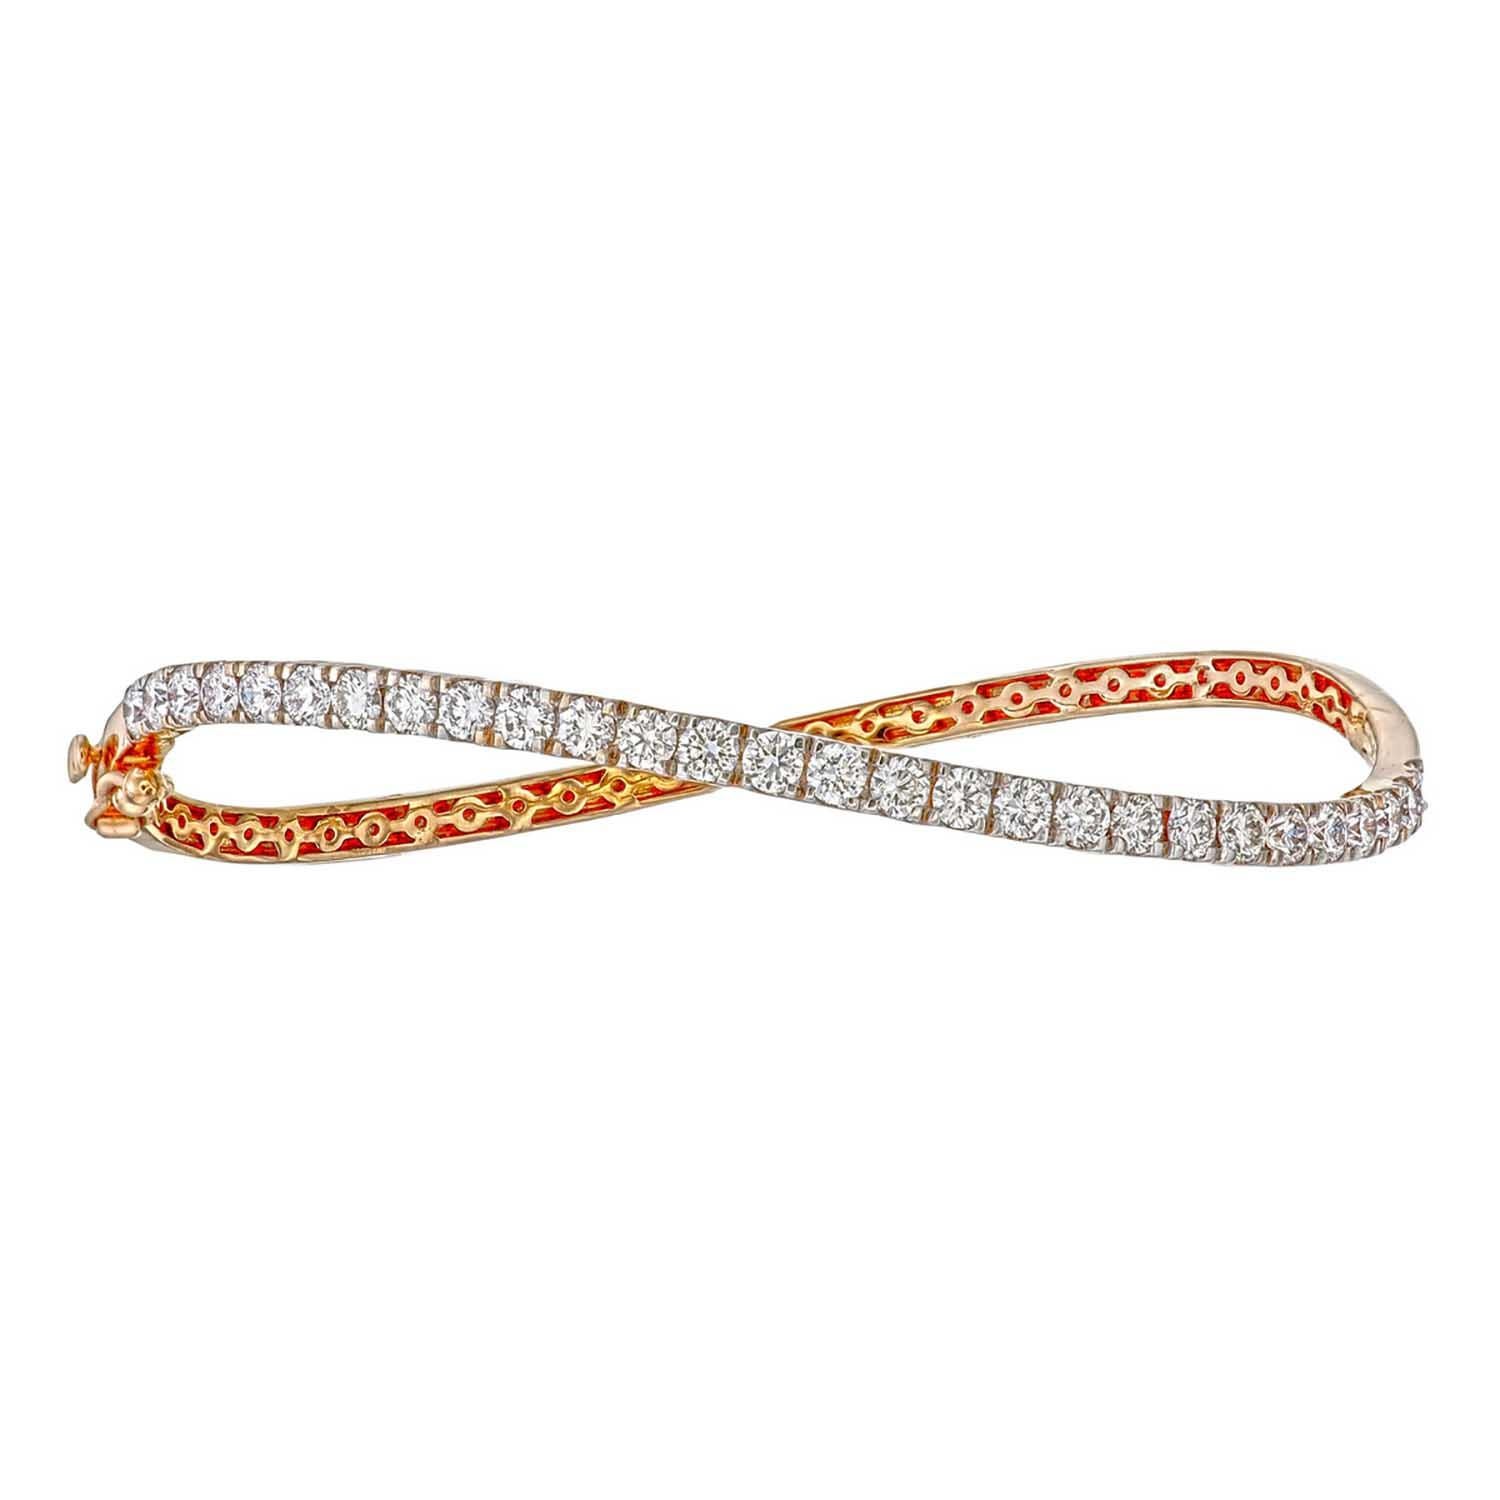 18k gold diamond curved bangle in 6.5 inches in length
The sleek design of this diamond-encrusted wave bangle flatters every wrist. -
 18K gold weighing 10 grams with 29 round diamonds totaling 1.80 carats

 Available in yellow, white, and rose